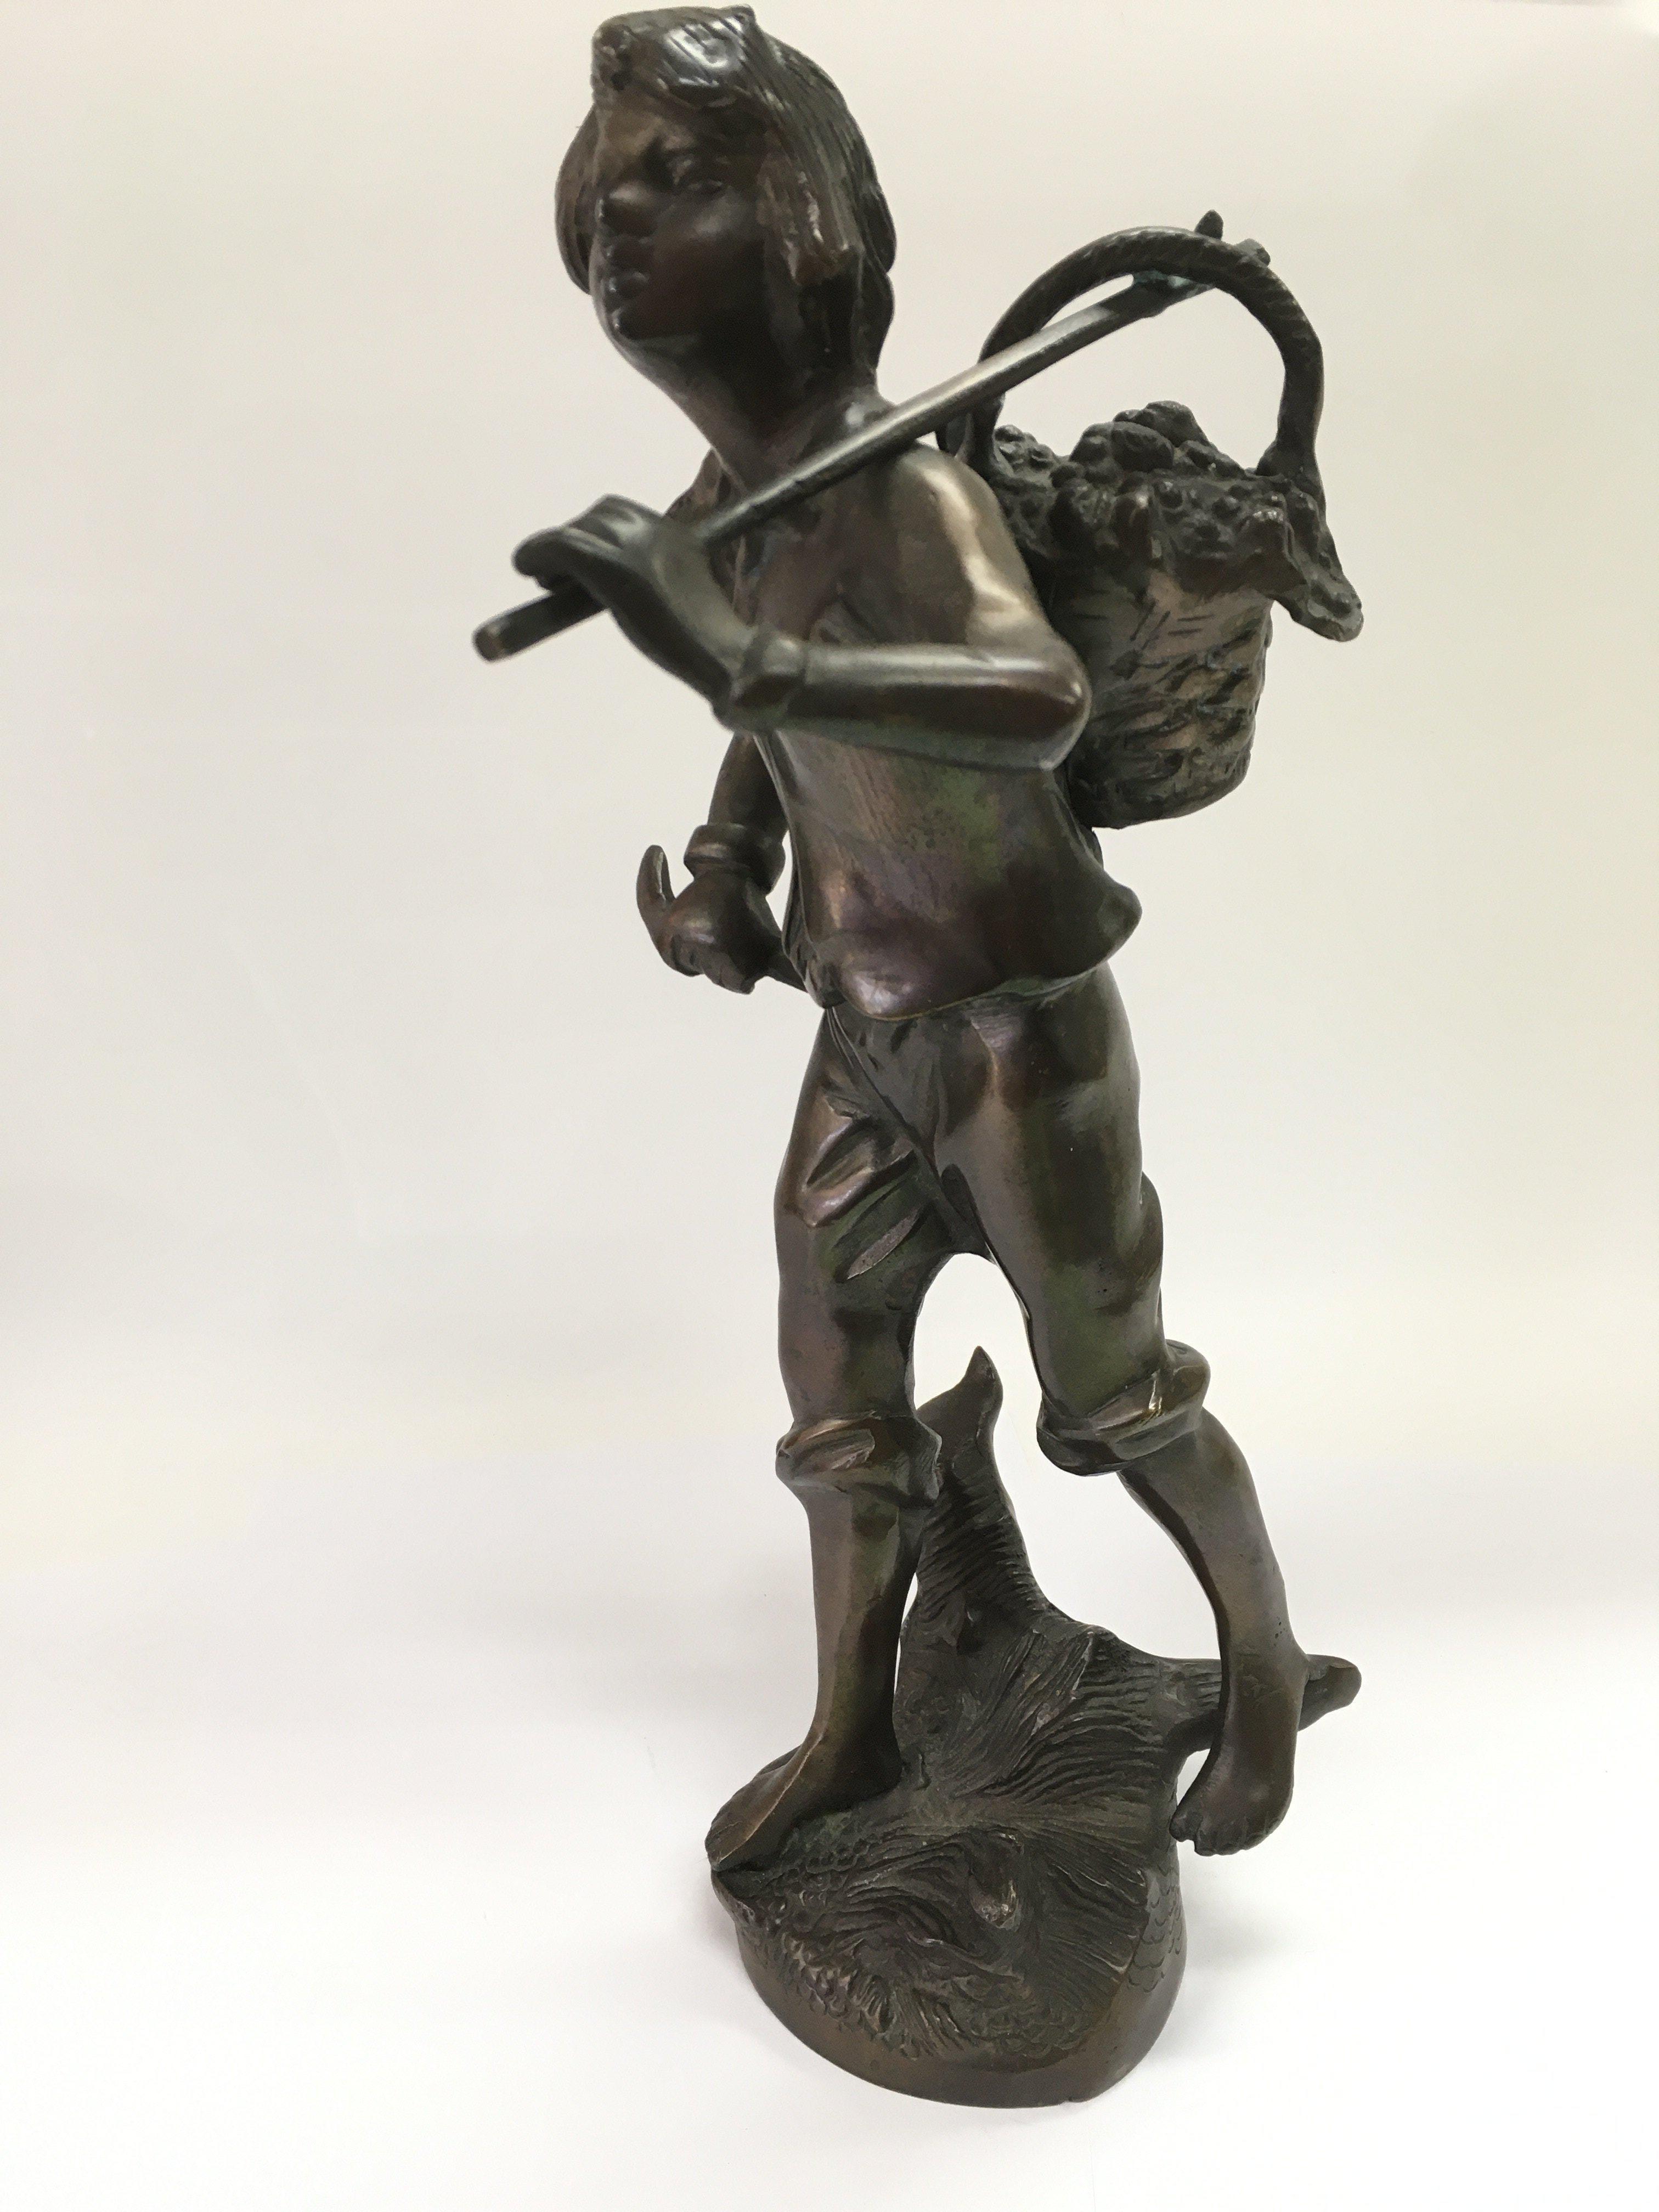 A bronze figure of a farmworker carrying a basket